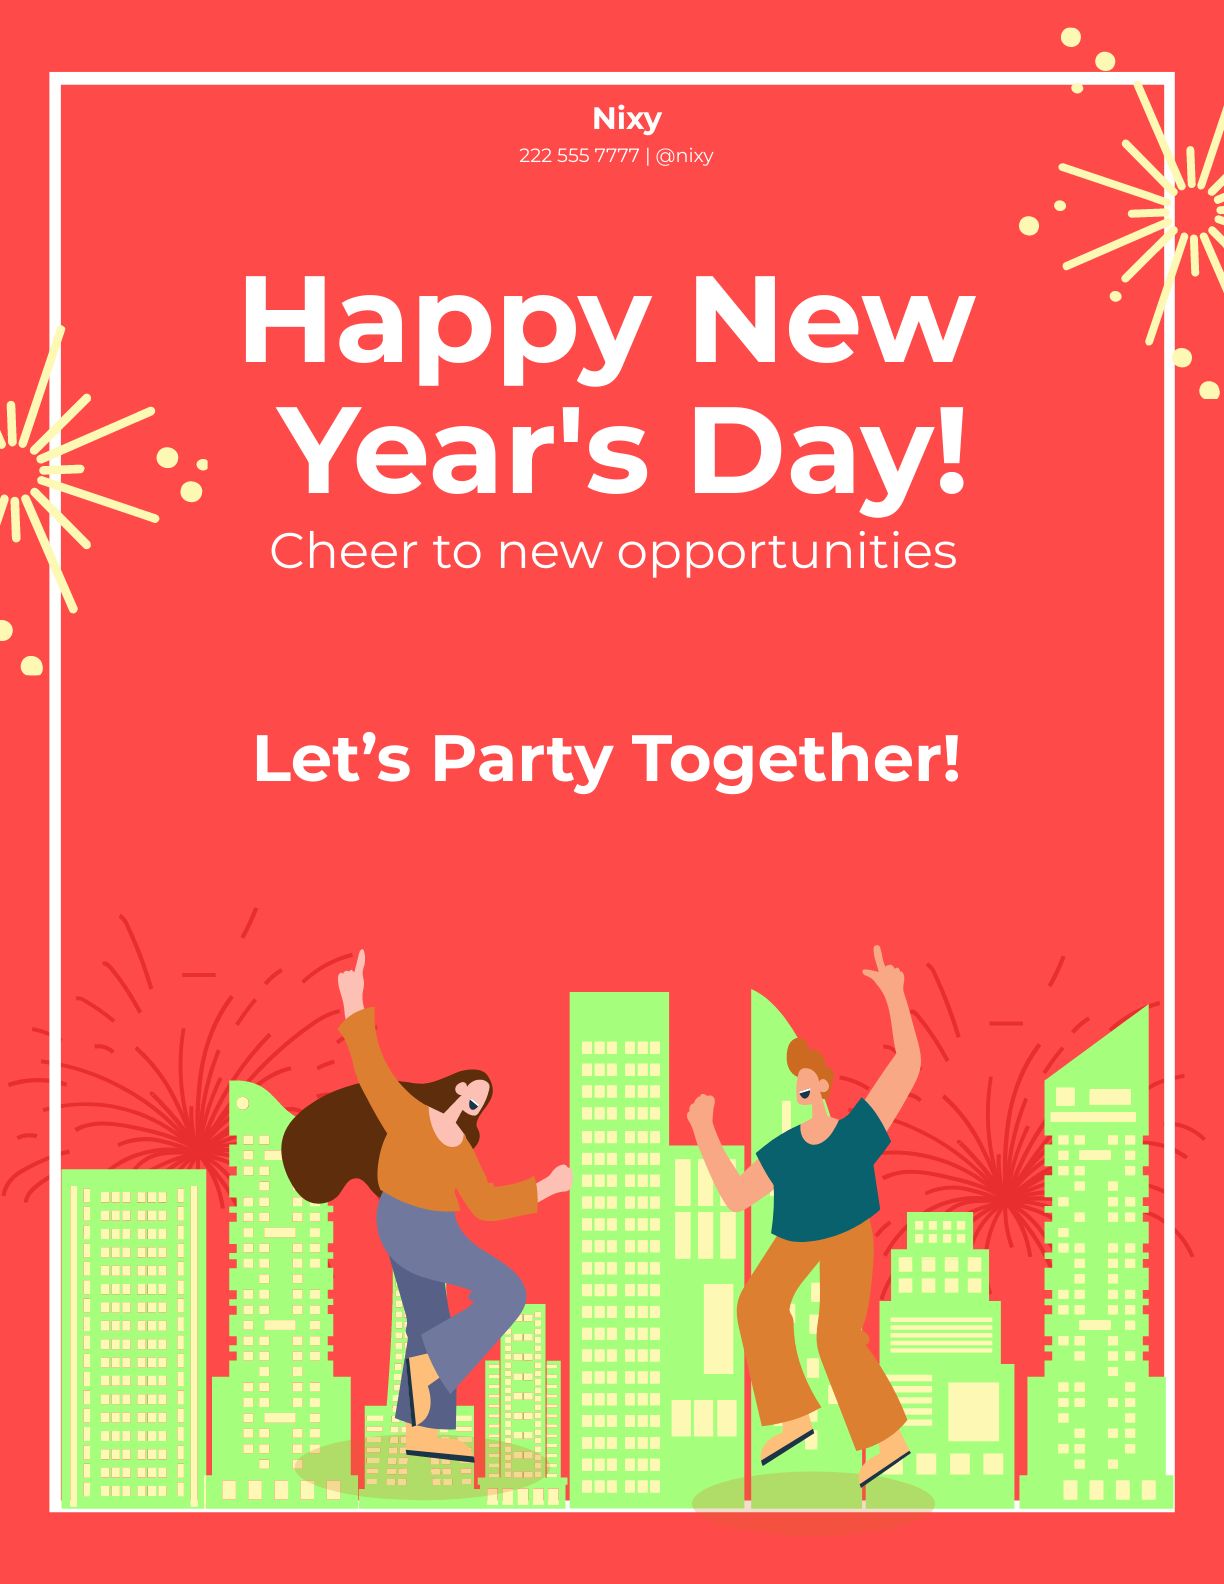 Happy New Year's Day Flyer in Word, Google Docs, Illustrator, PSD, EPS, SVG, JPG, PNG